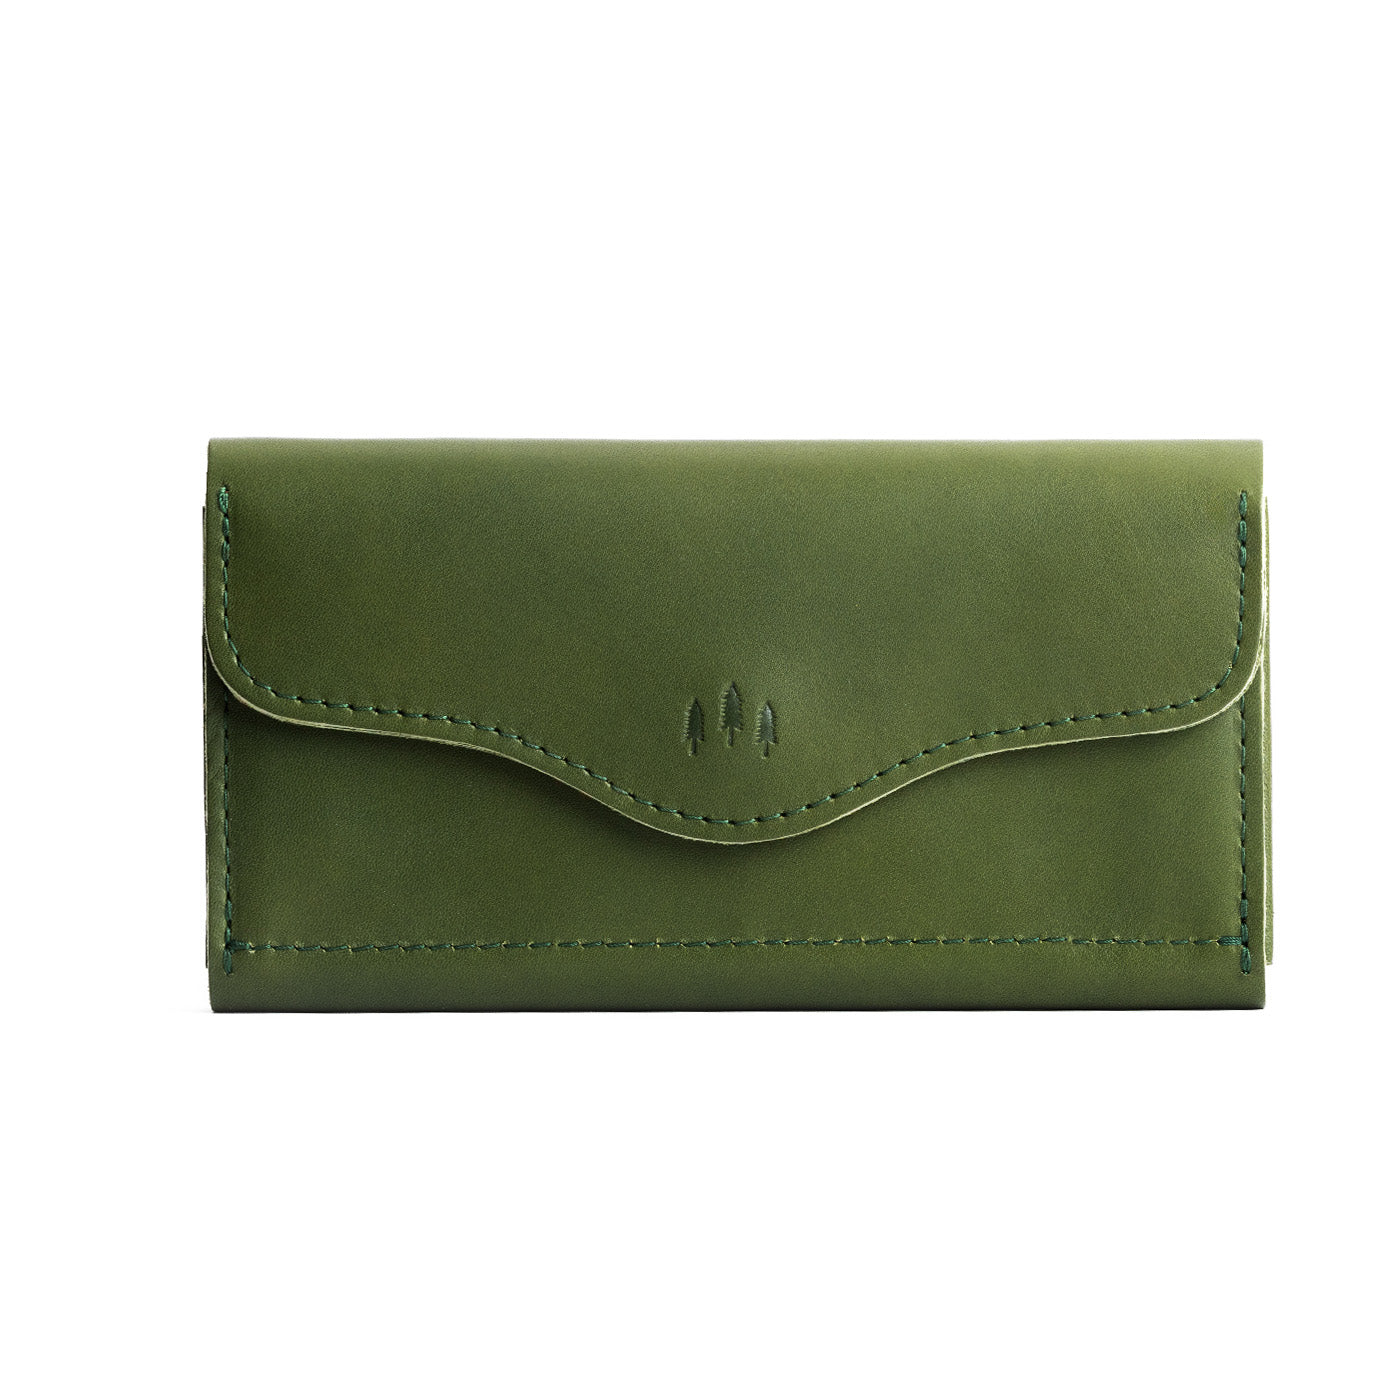 Pine | Large leather wallet with snap closure and three trees debossed